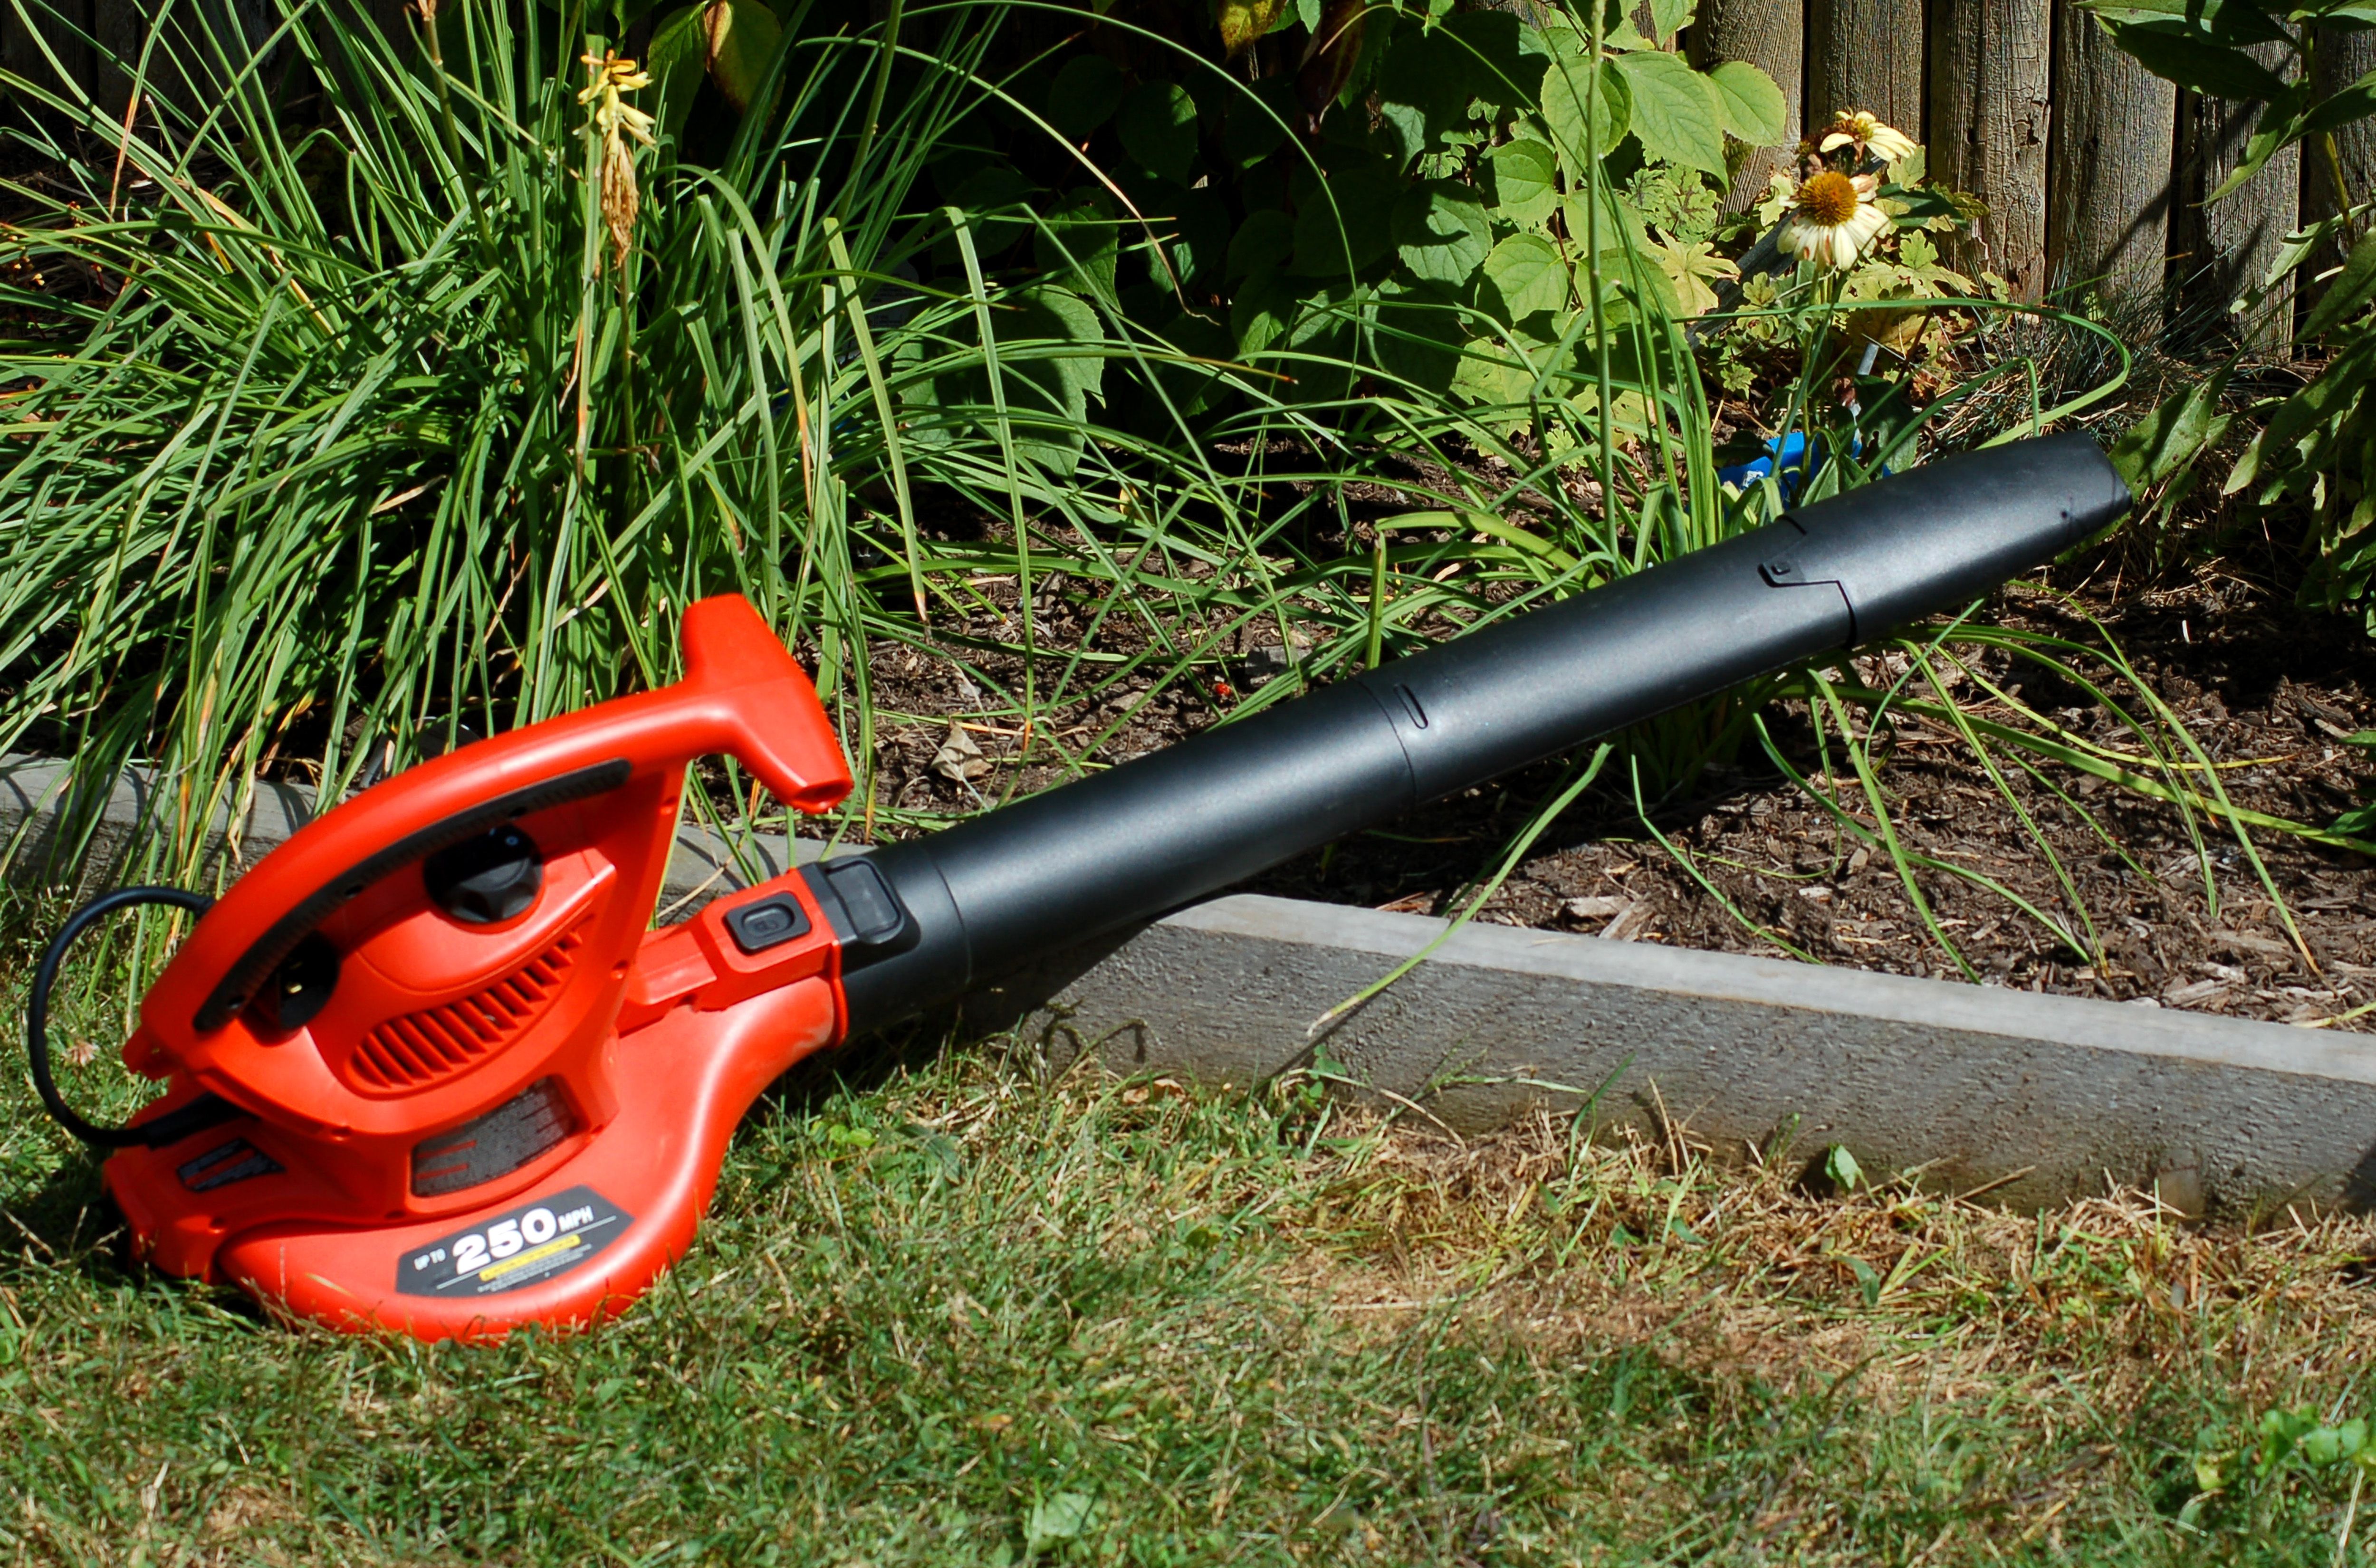 How to Use Leaf Blower/Vacs and When Not To